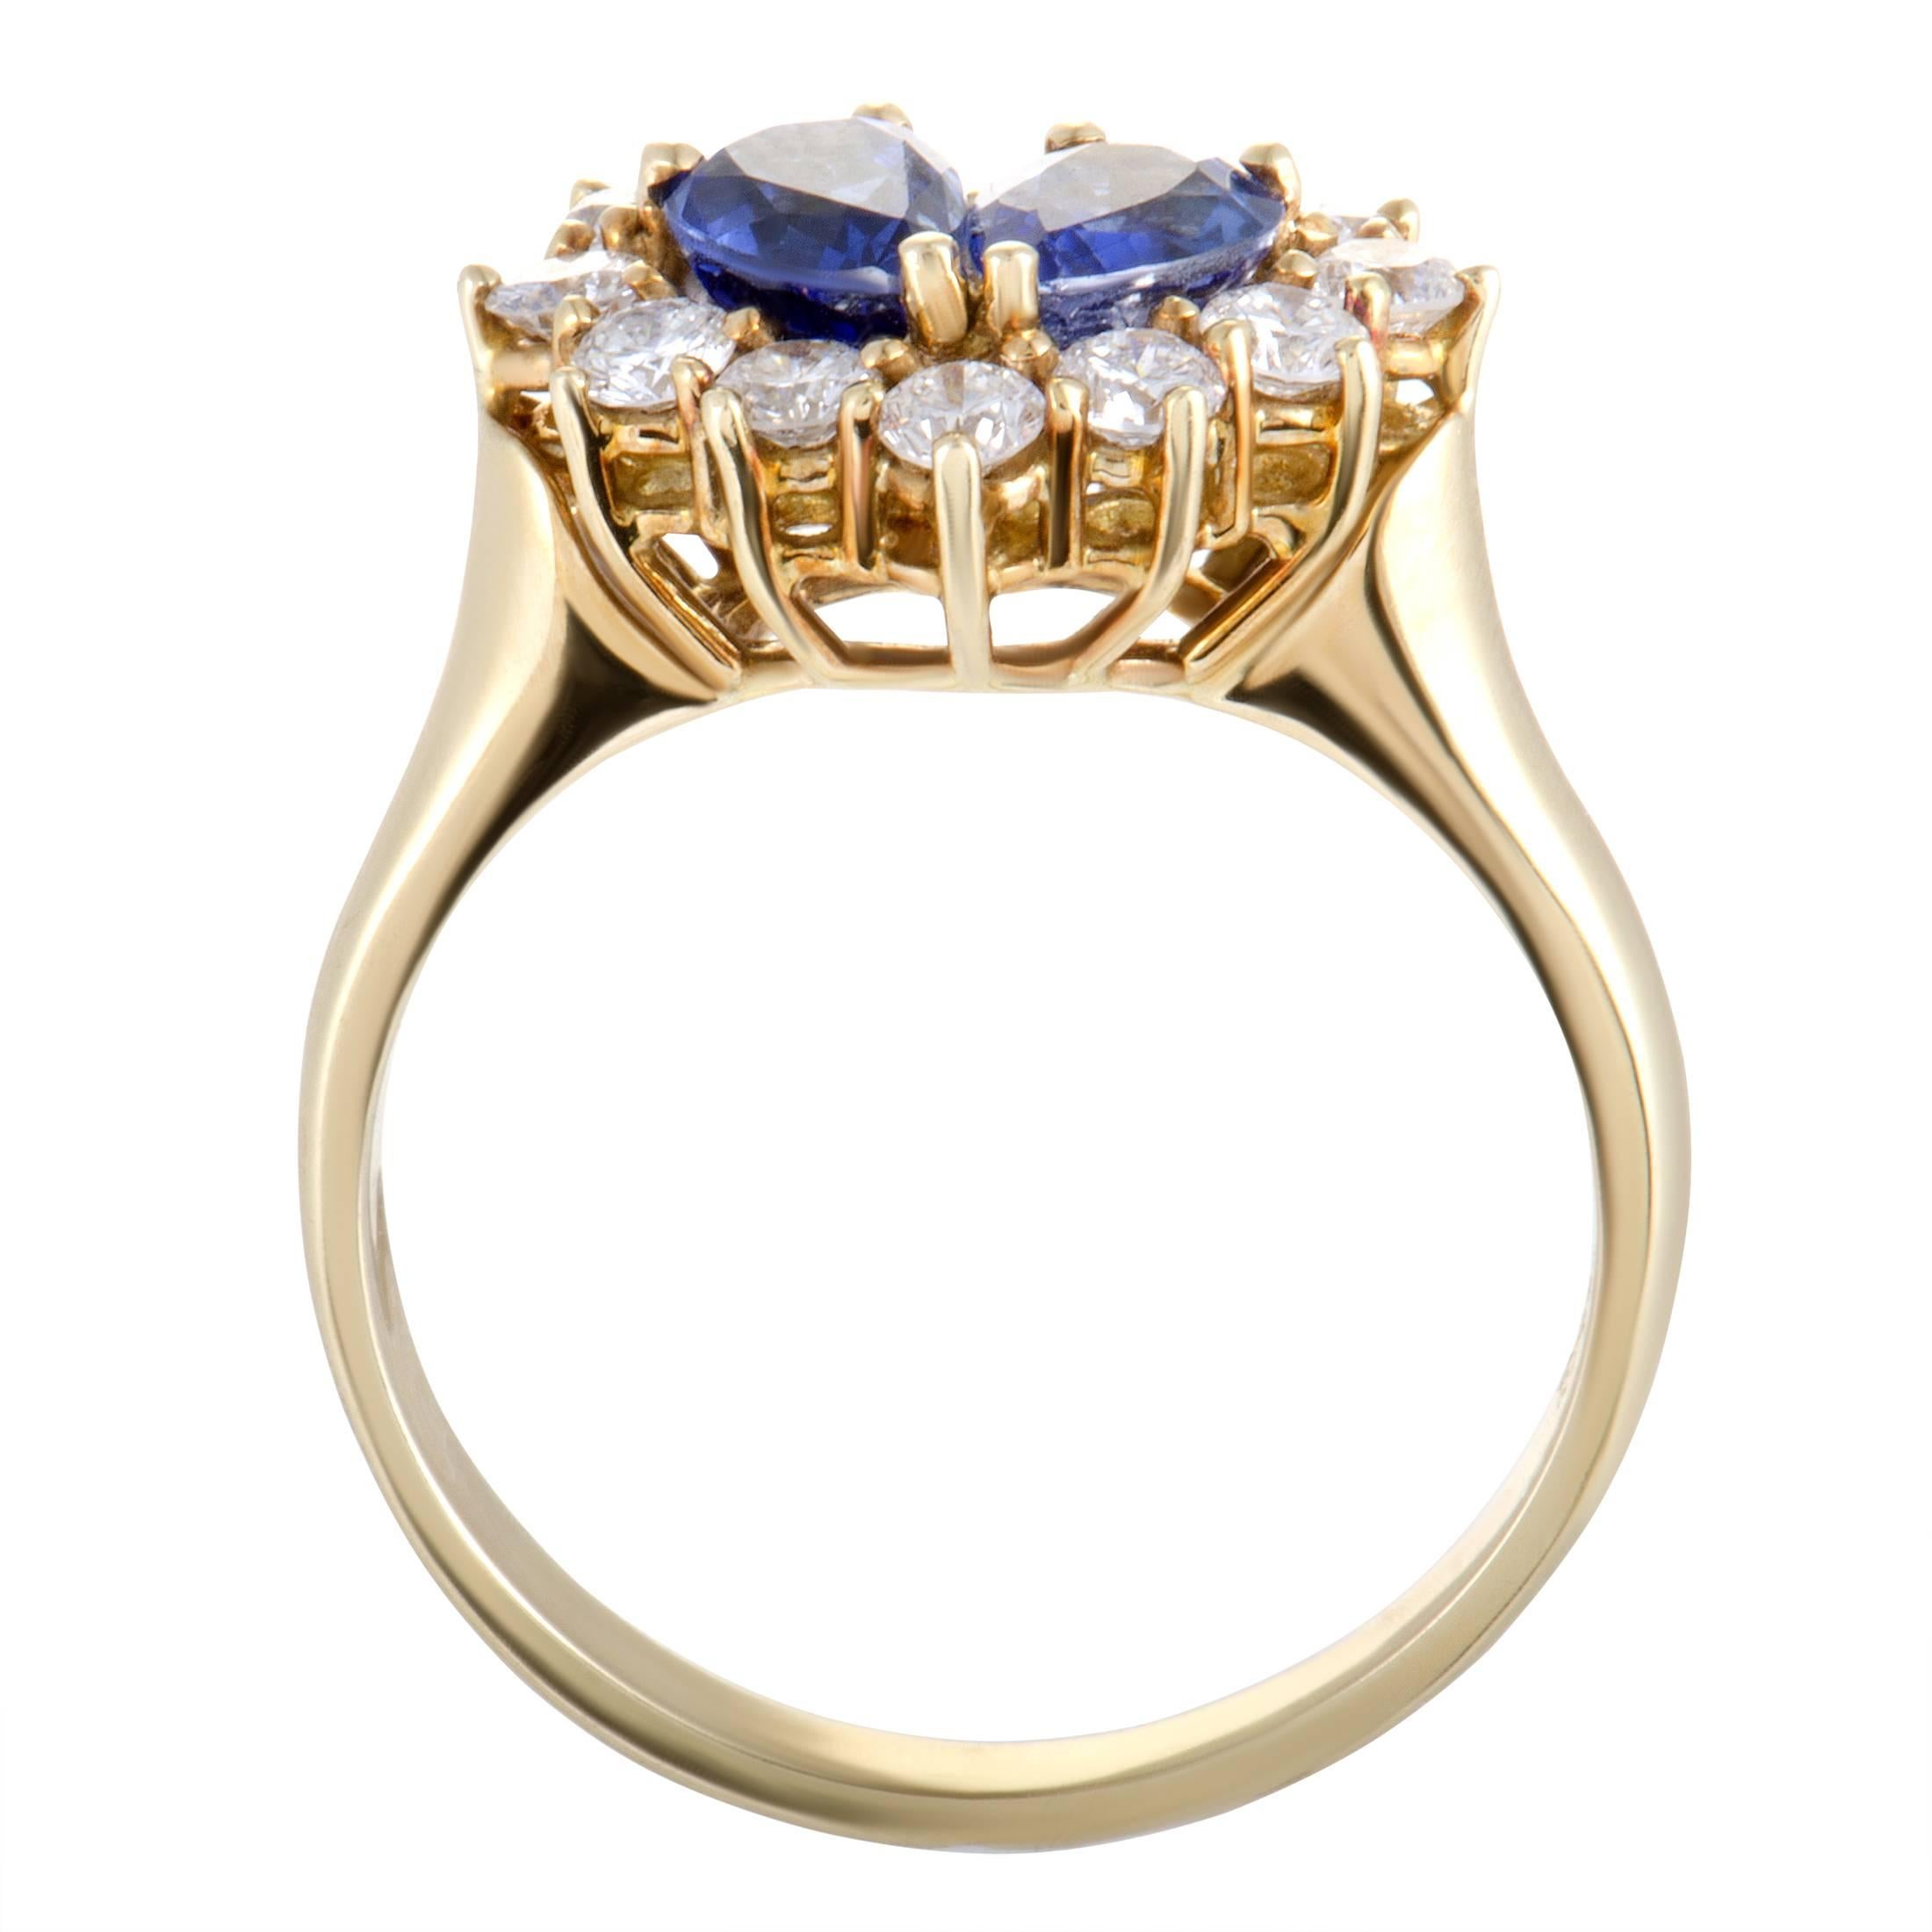 Perfect even for the most glamorous events, this vintage ring designed by Graff is made of classy 18K yellow gold and decorated with a luxurious blend of diamond and sapphire stones. The sapphires weigh in total 1.00 carat, and the diamonds